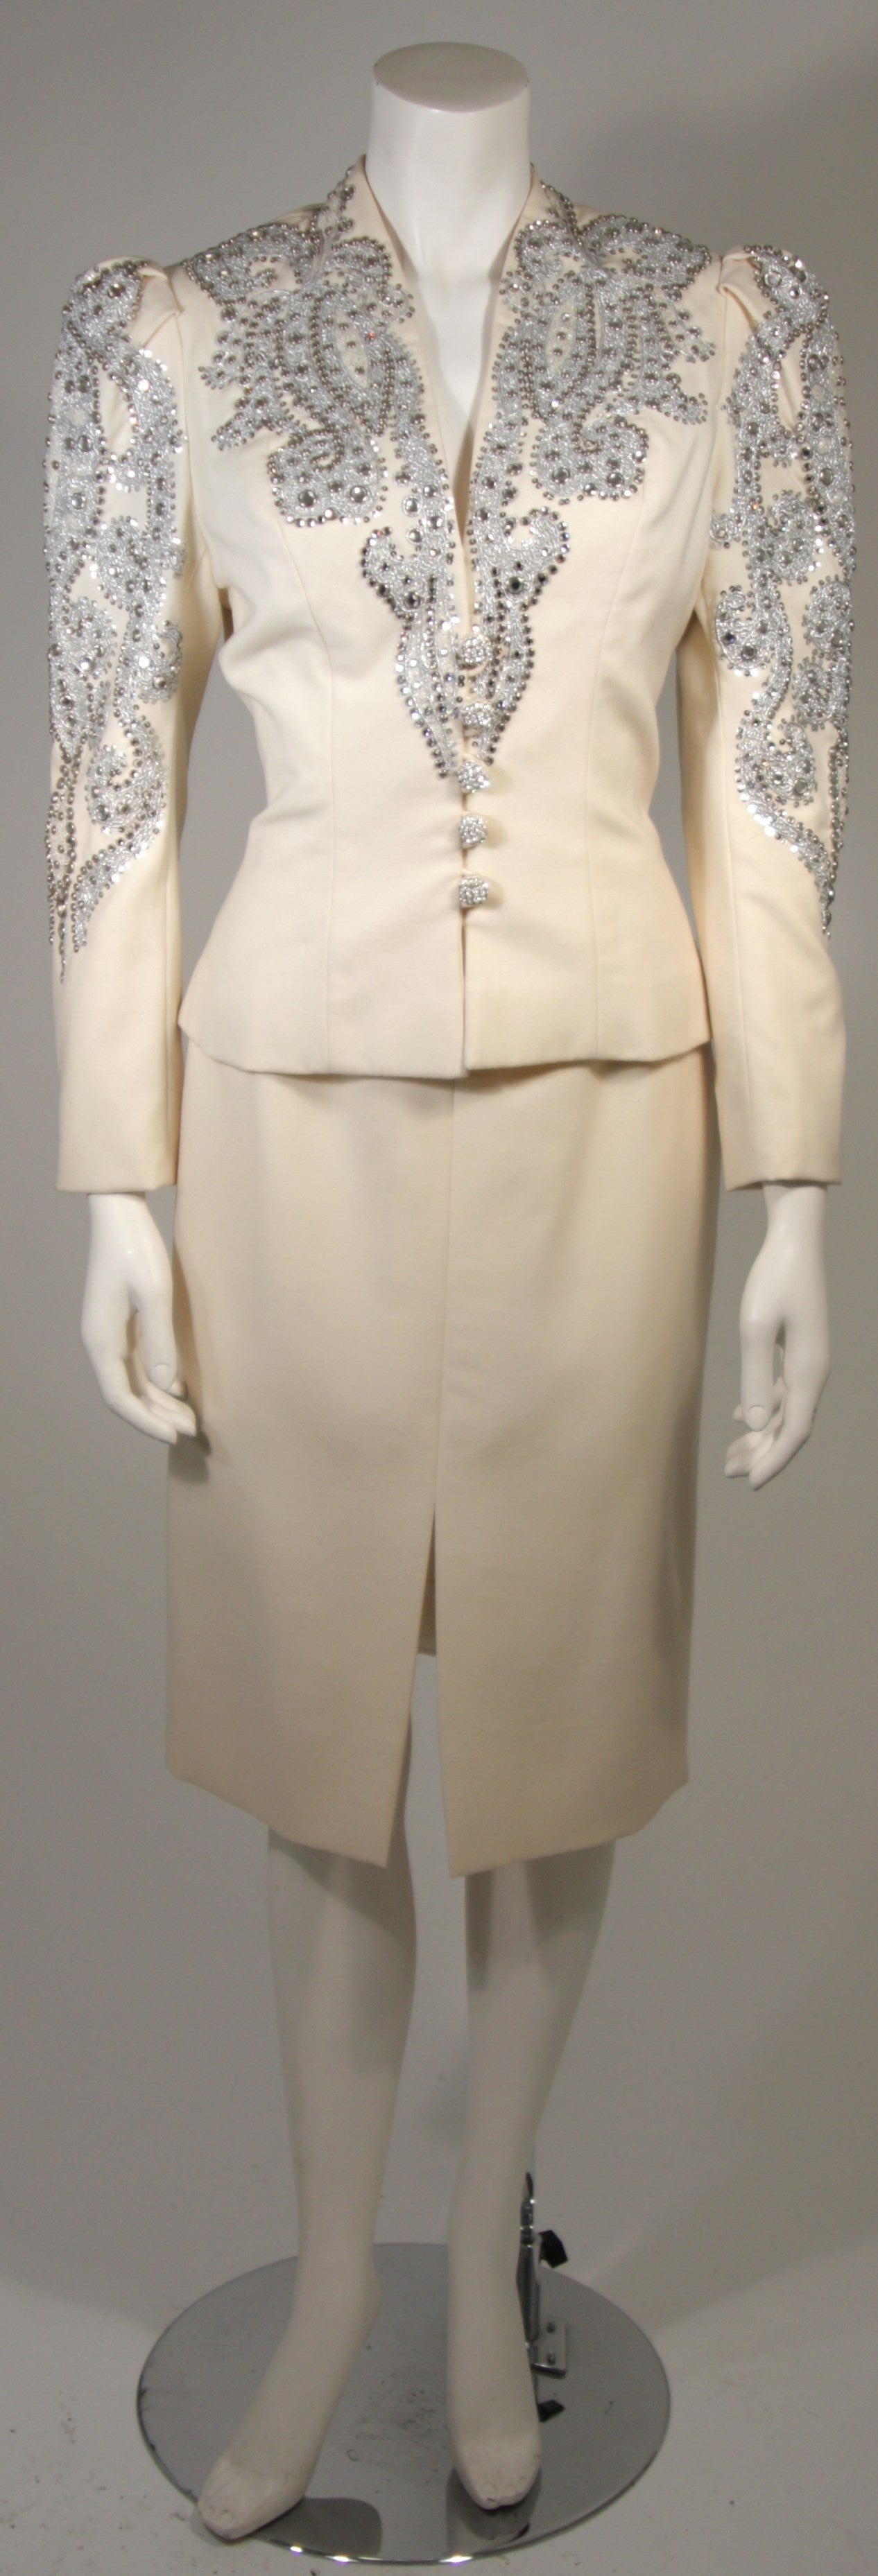 This Nolan Miller set is composed of an Ivory wool which is embellished with rhinestones and silver lace. The blazer features center front rhinestone buttons and a peplum flare design at the waist. In excellent condition.

Measures